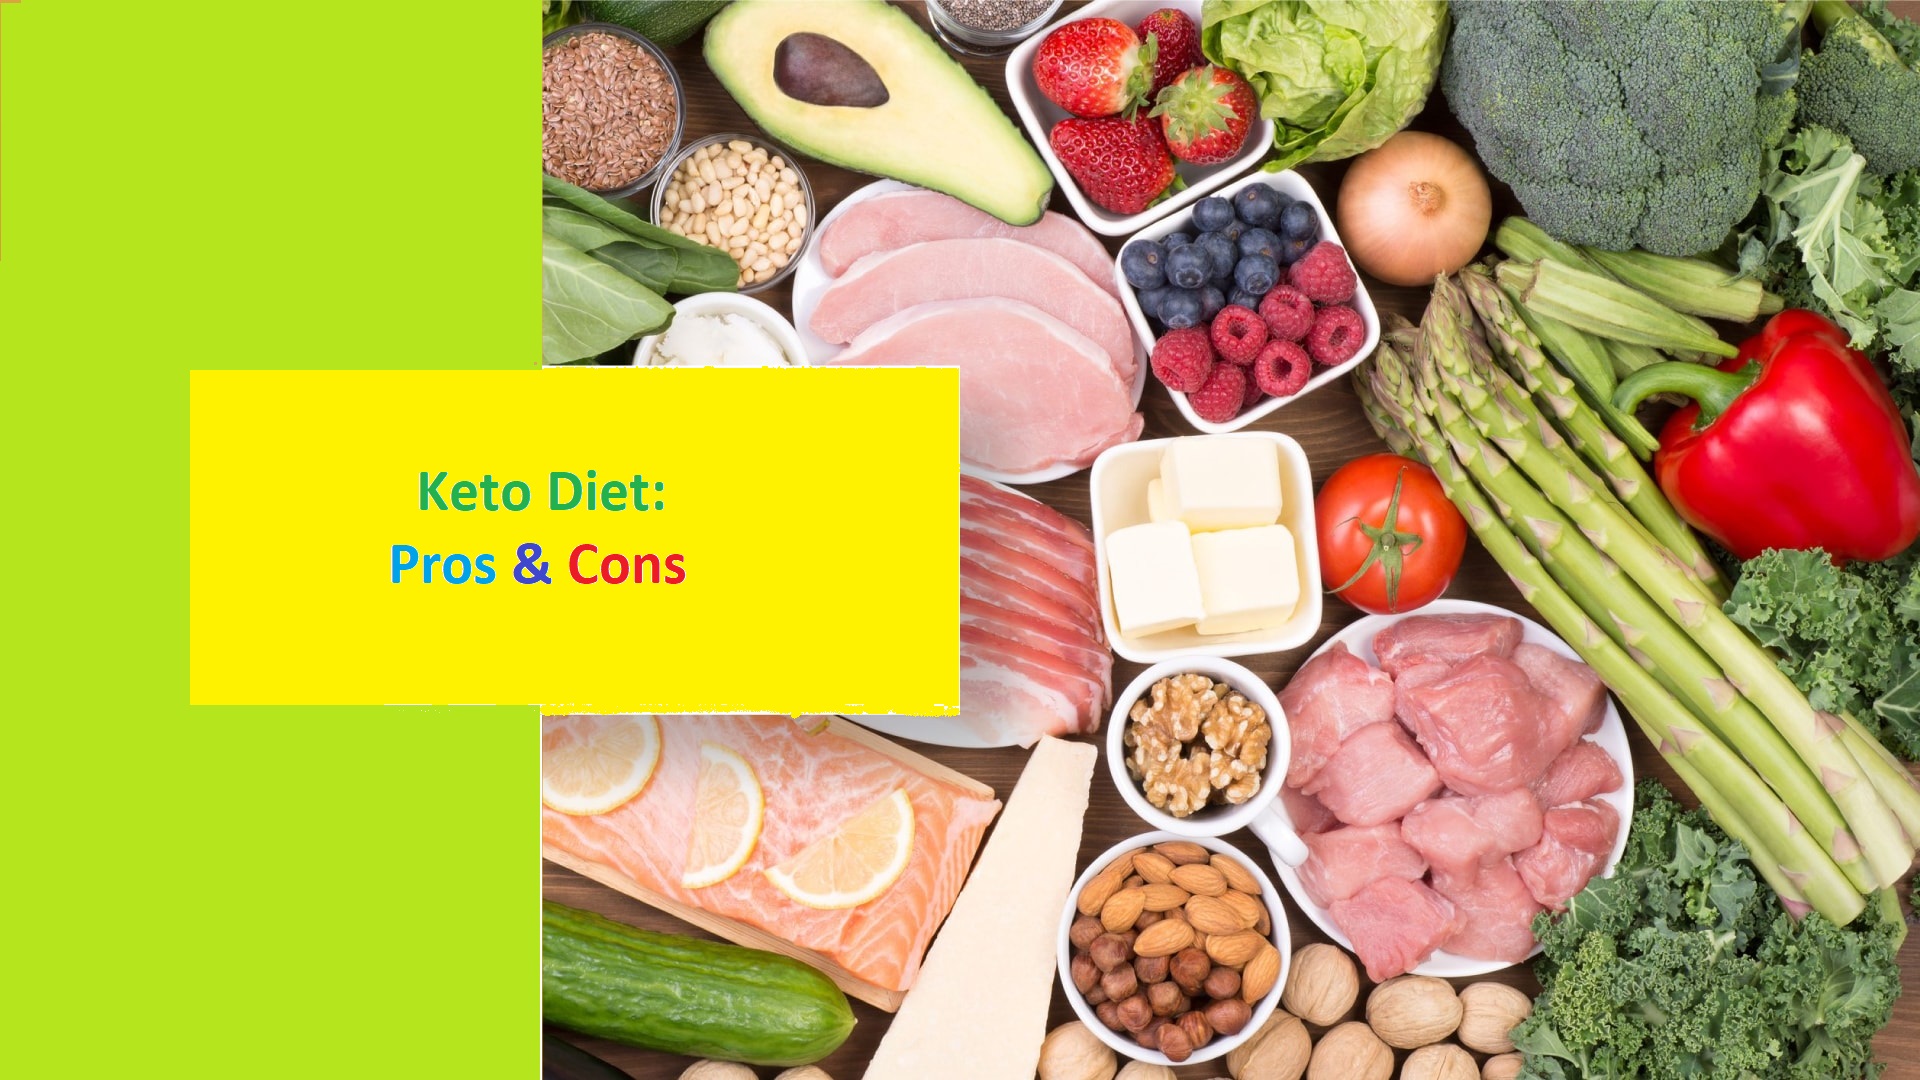 Pros and Cons of Keto Diet